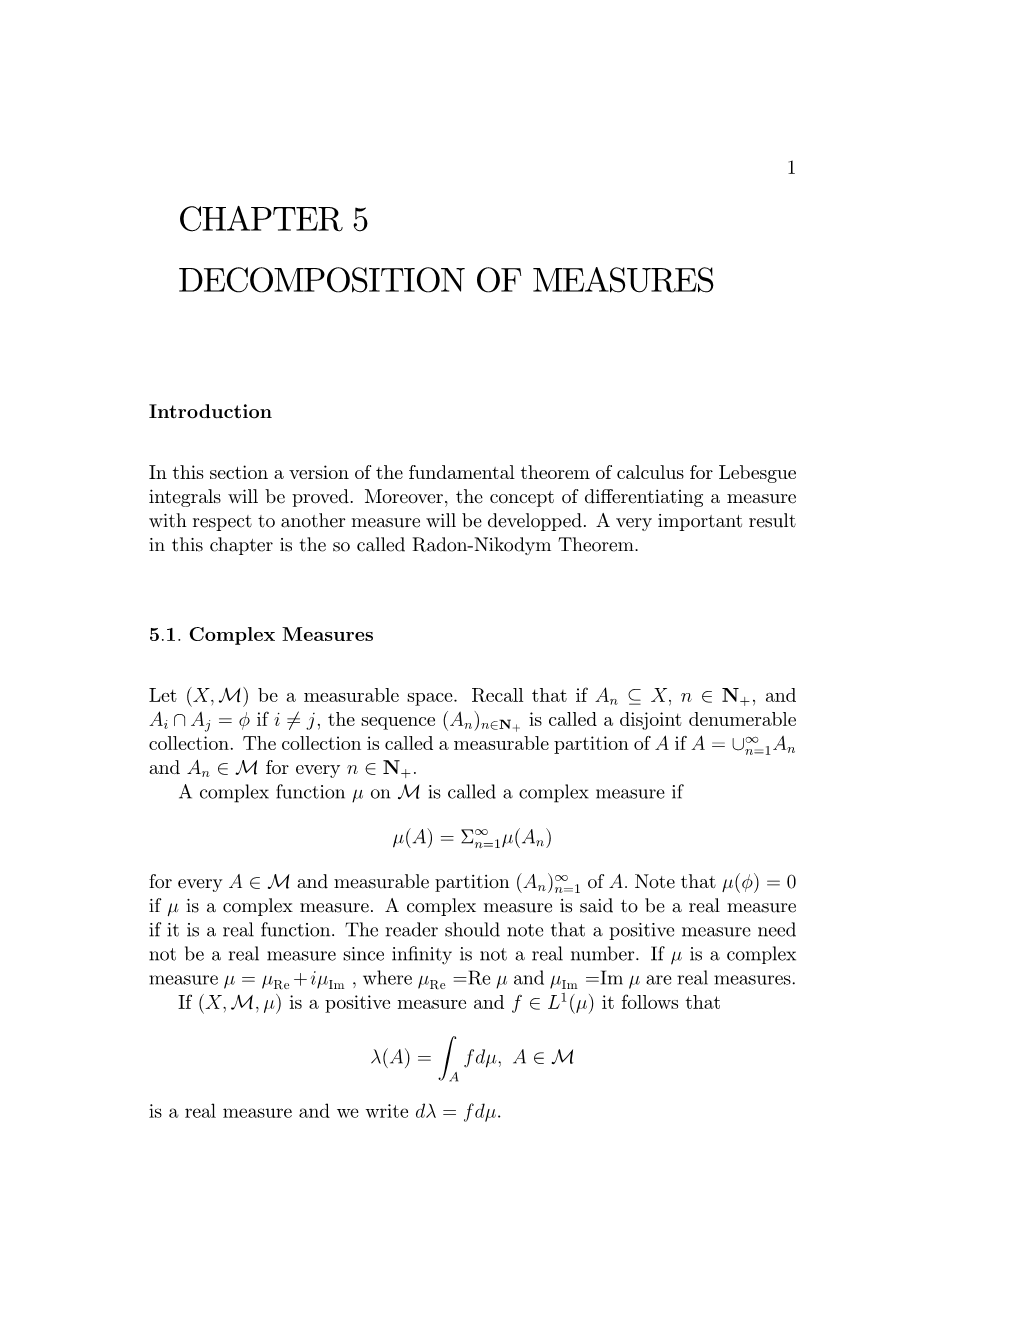 Chapter 5 Decomposition of Measures